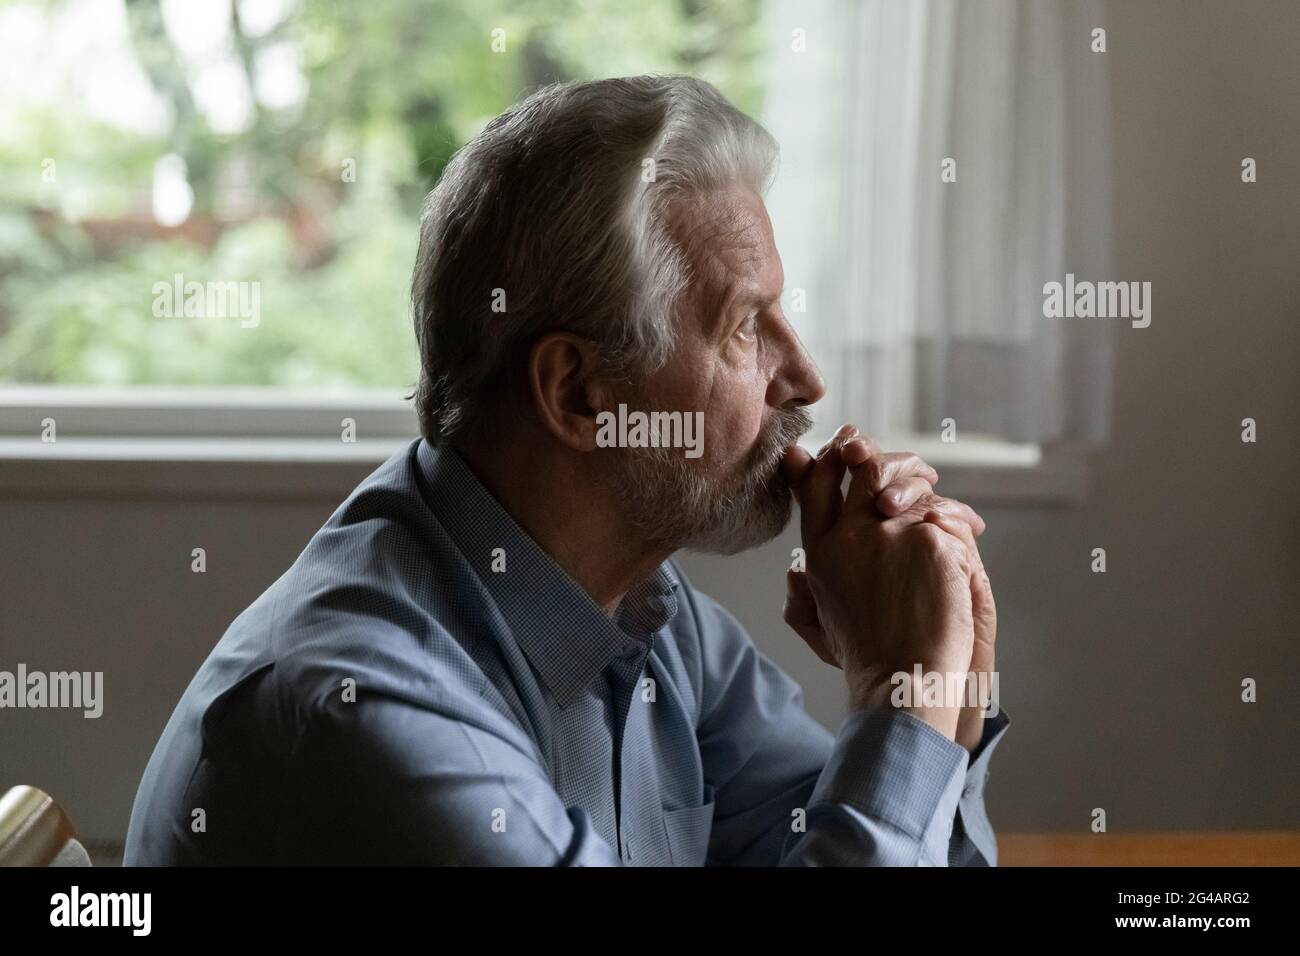 Sad older man look in distance feeling lonely depressed Stock Photo